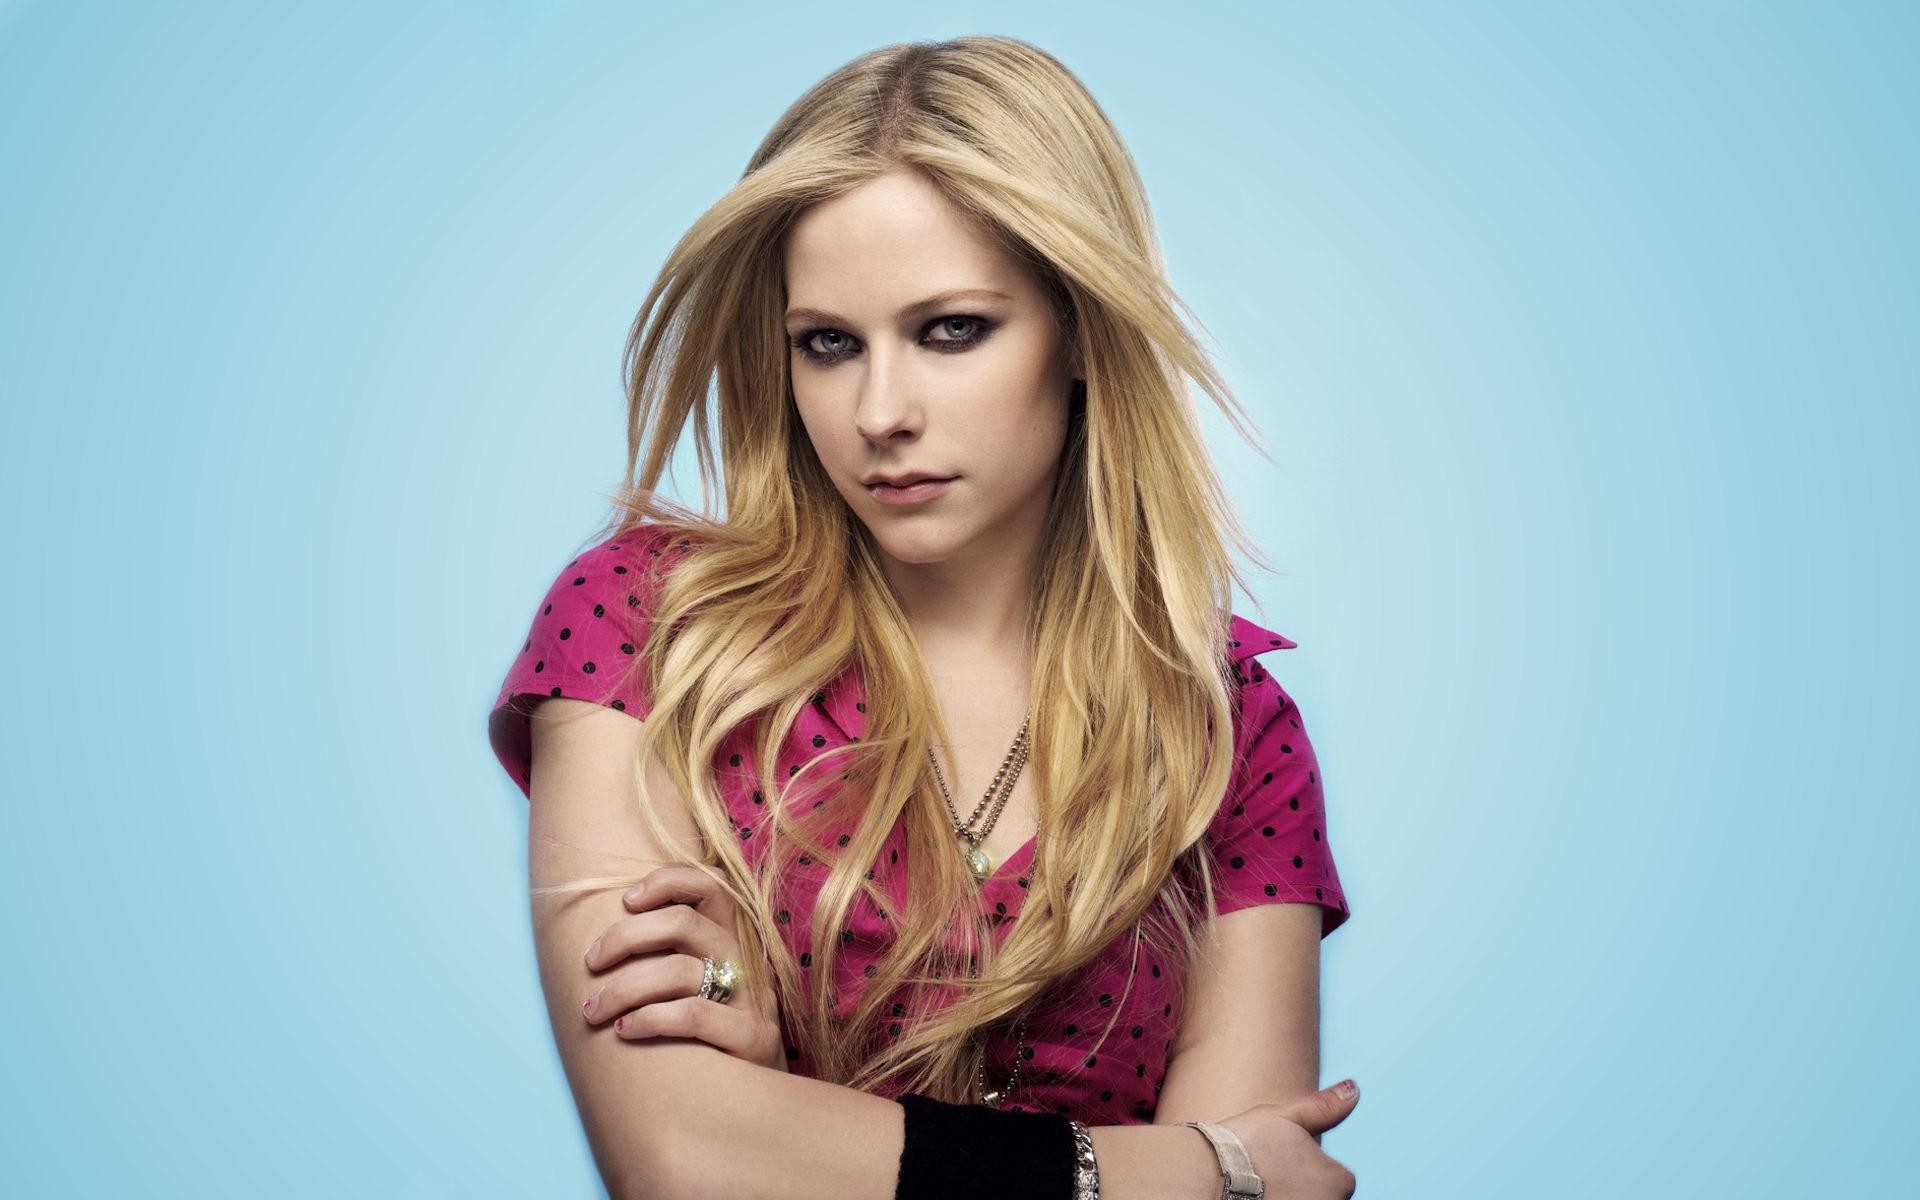 Avril Lavigne Singer Blonde Arms Crossed Arms On Chest Looking At Viewer Women 1920x1200